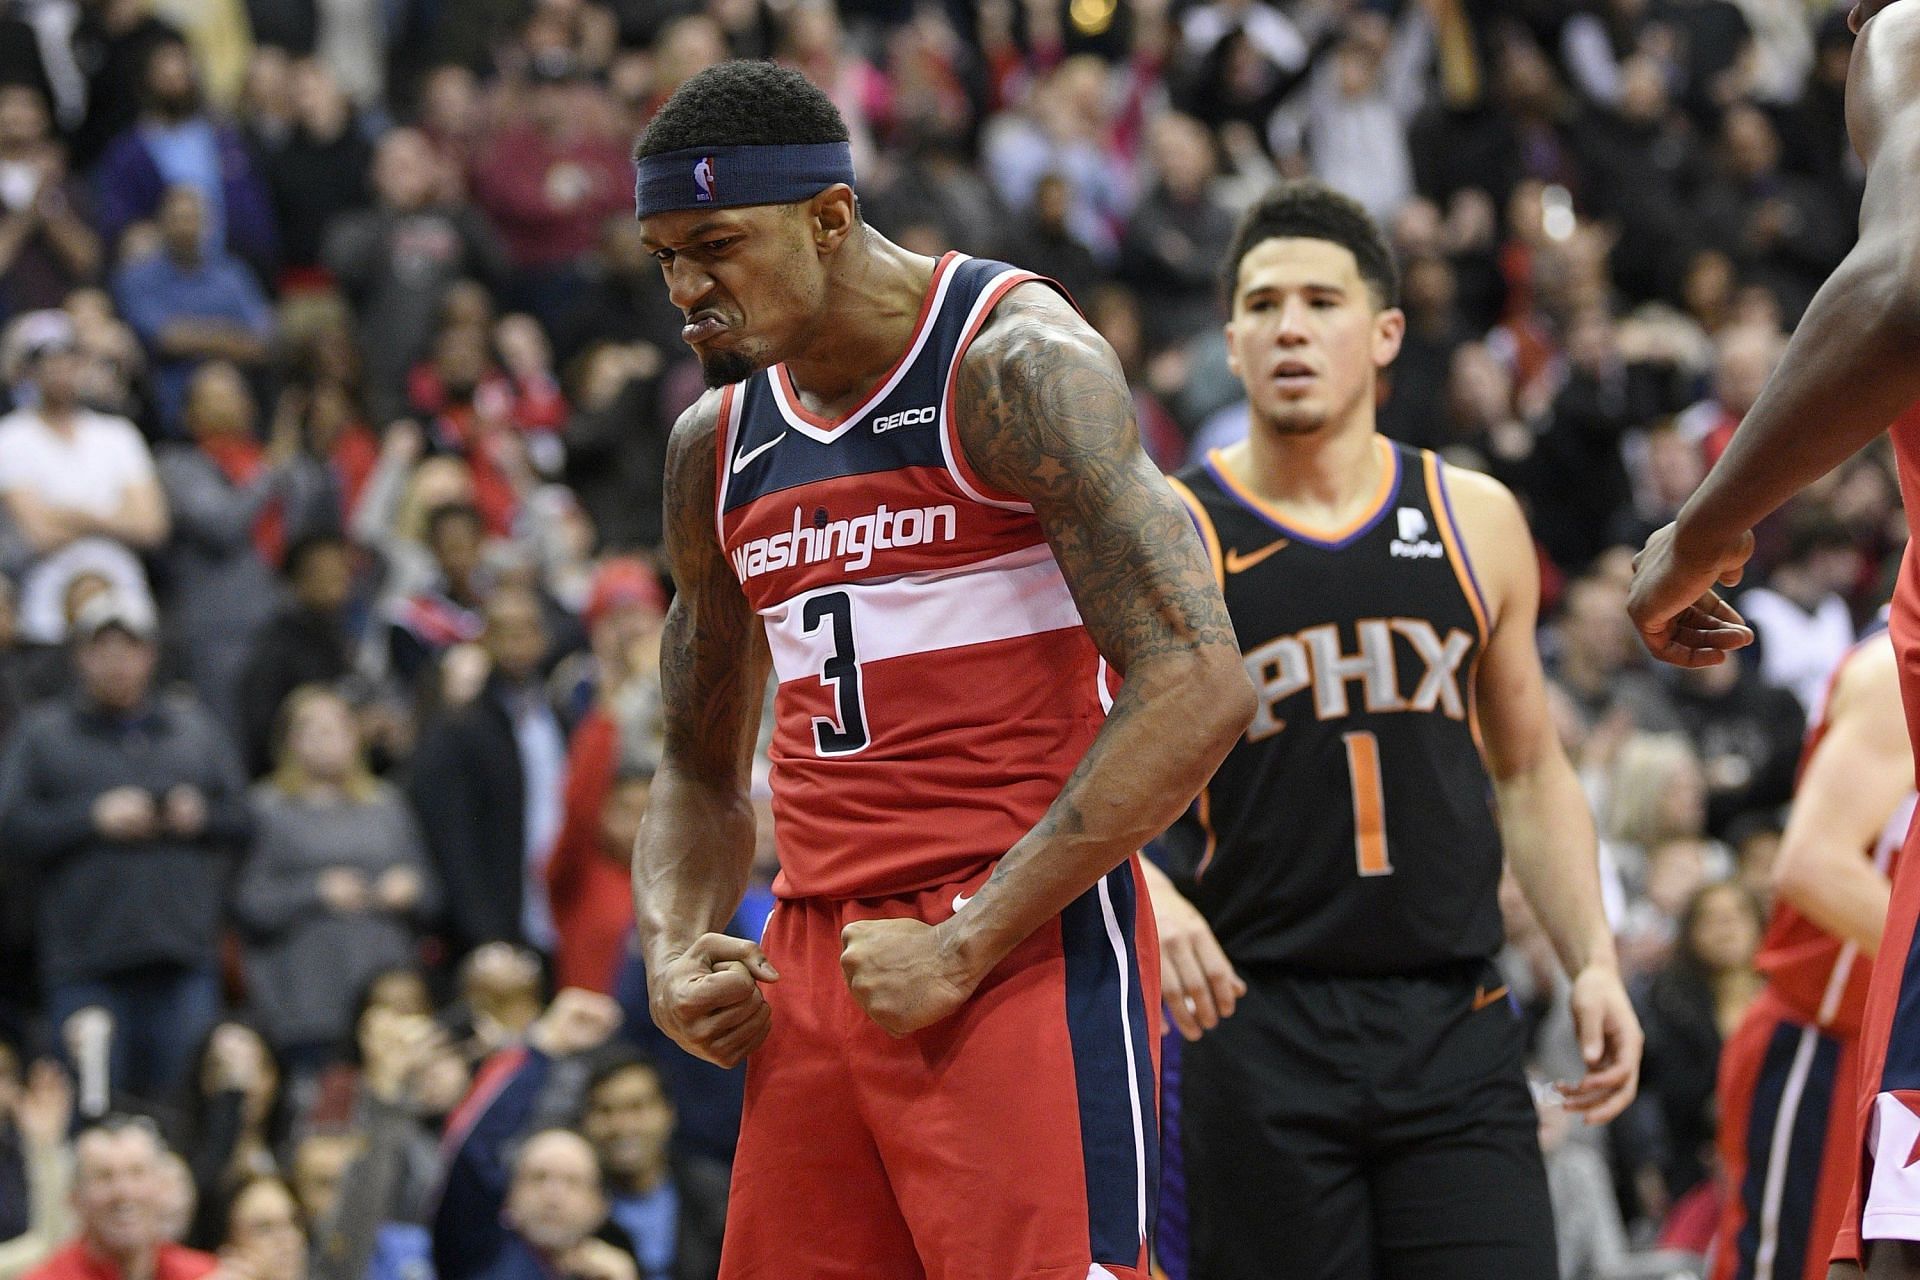 Bradley Beal praises Devin Booker and shares his excitement in playing with the star